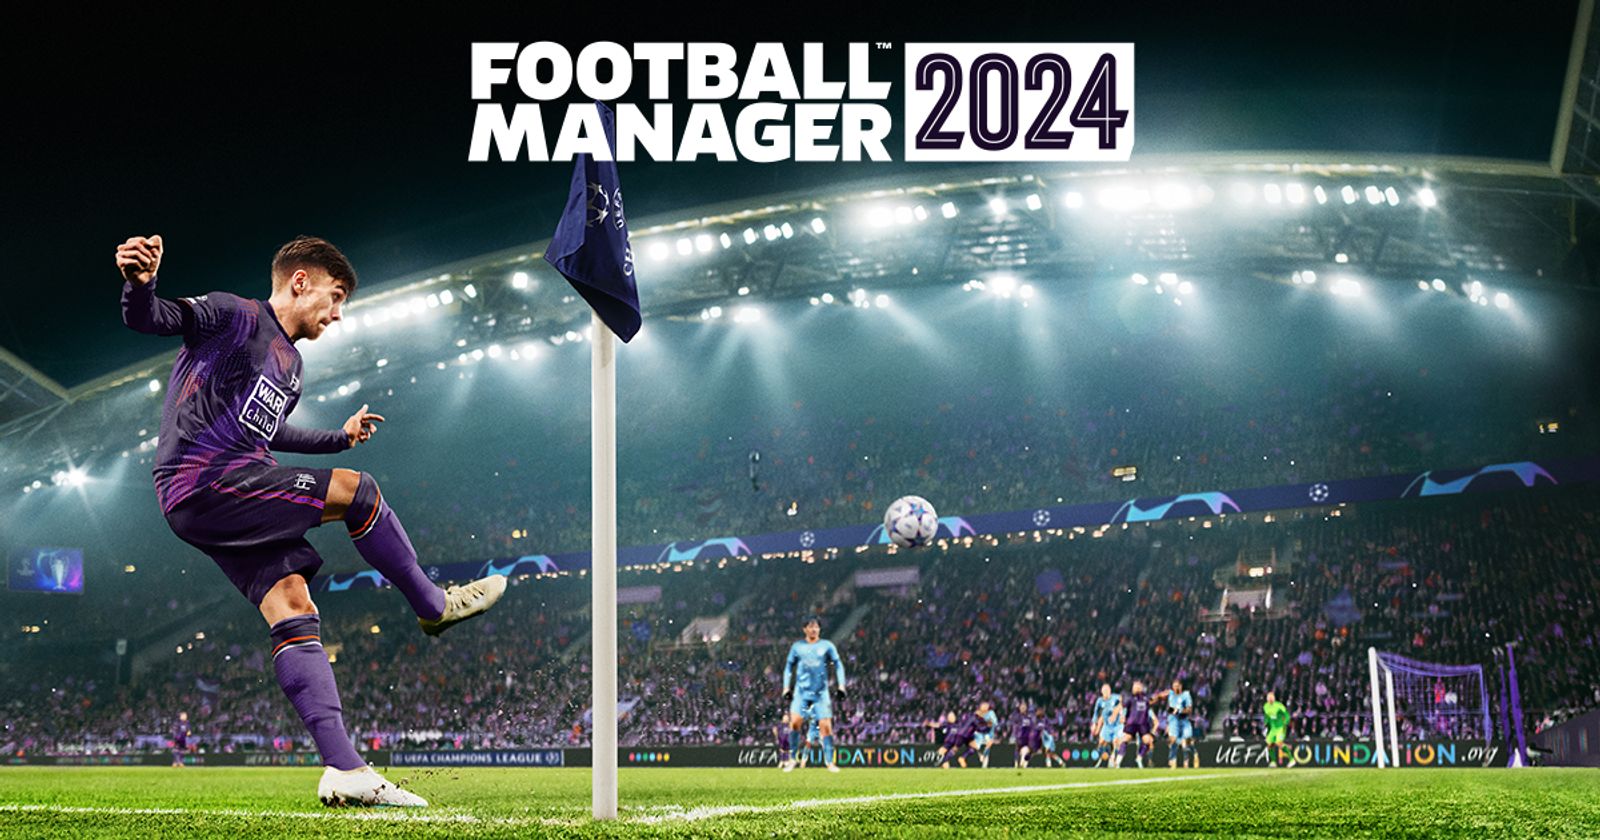 Football Manager 2024 wonderkids: The 650 best FM24 young stars